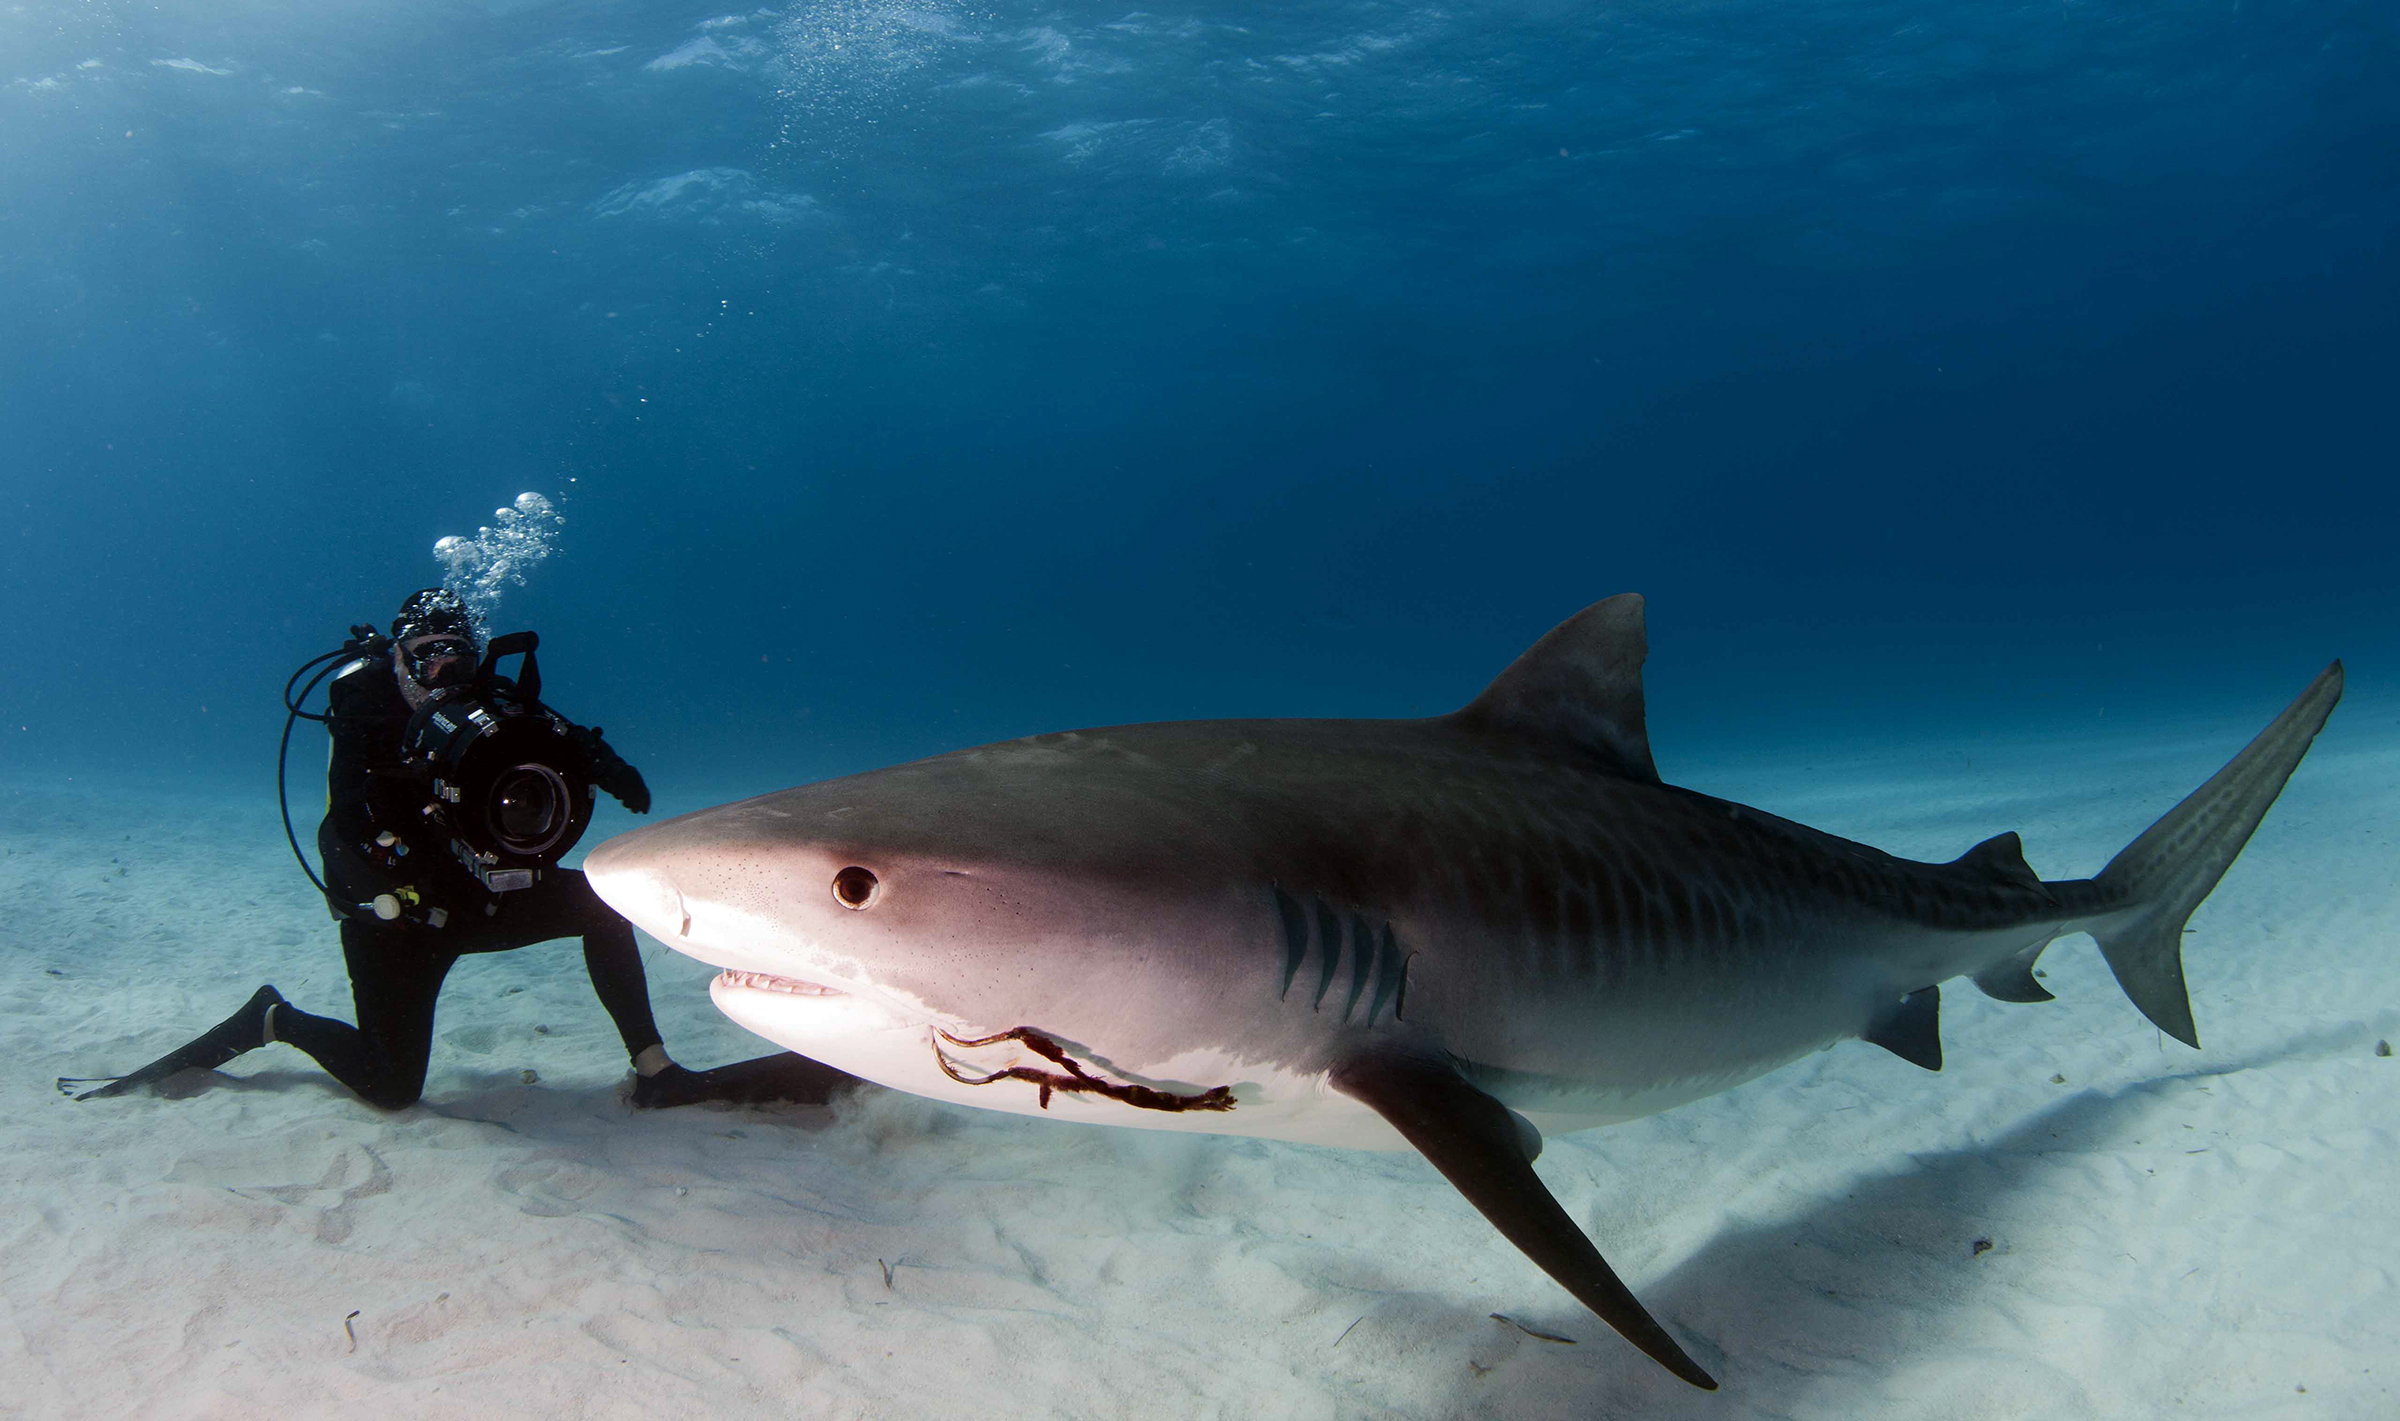 Underwater filmmaker Paul Cater Deaton films a 12-foot tiger shark during the production of his film 'Showdown at 'Tiger Beach.' (Photo by Chris Mazingo)